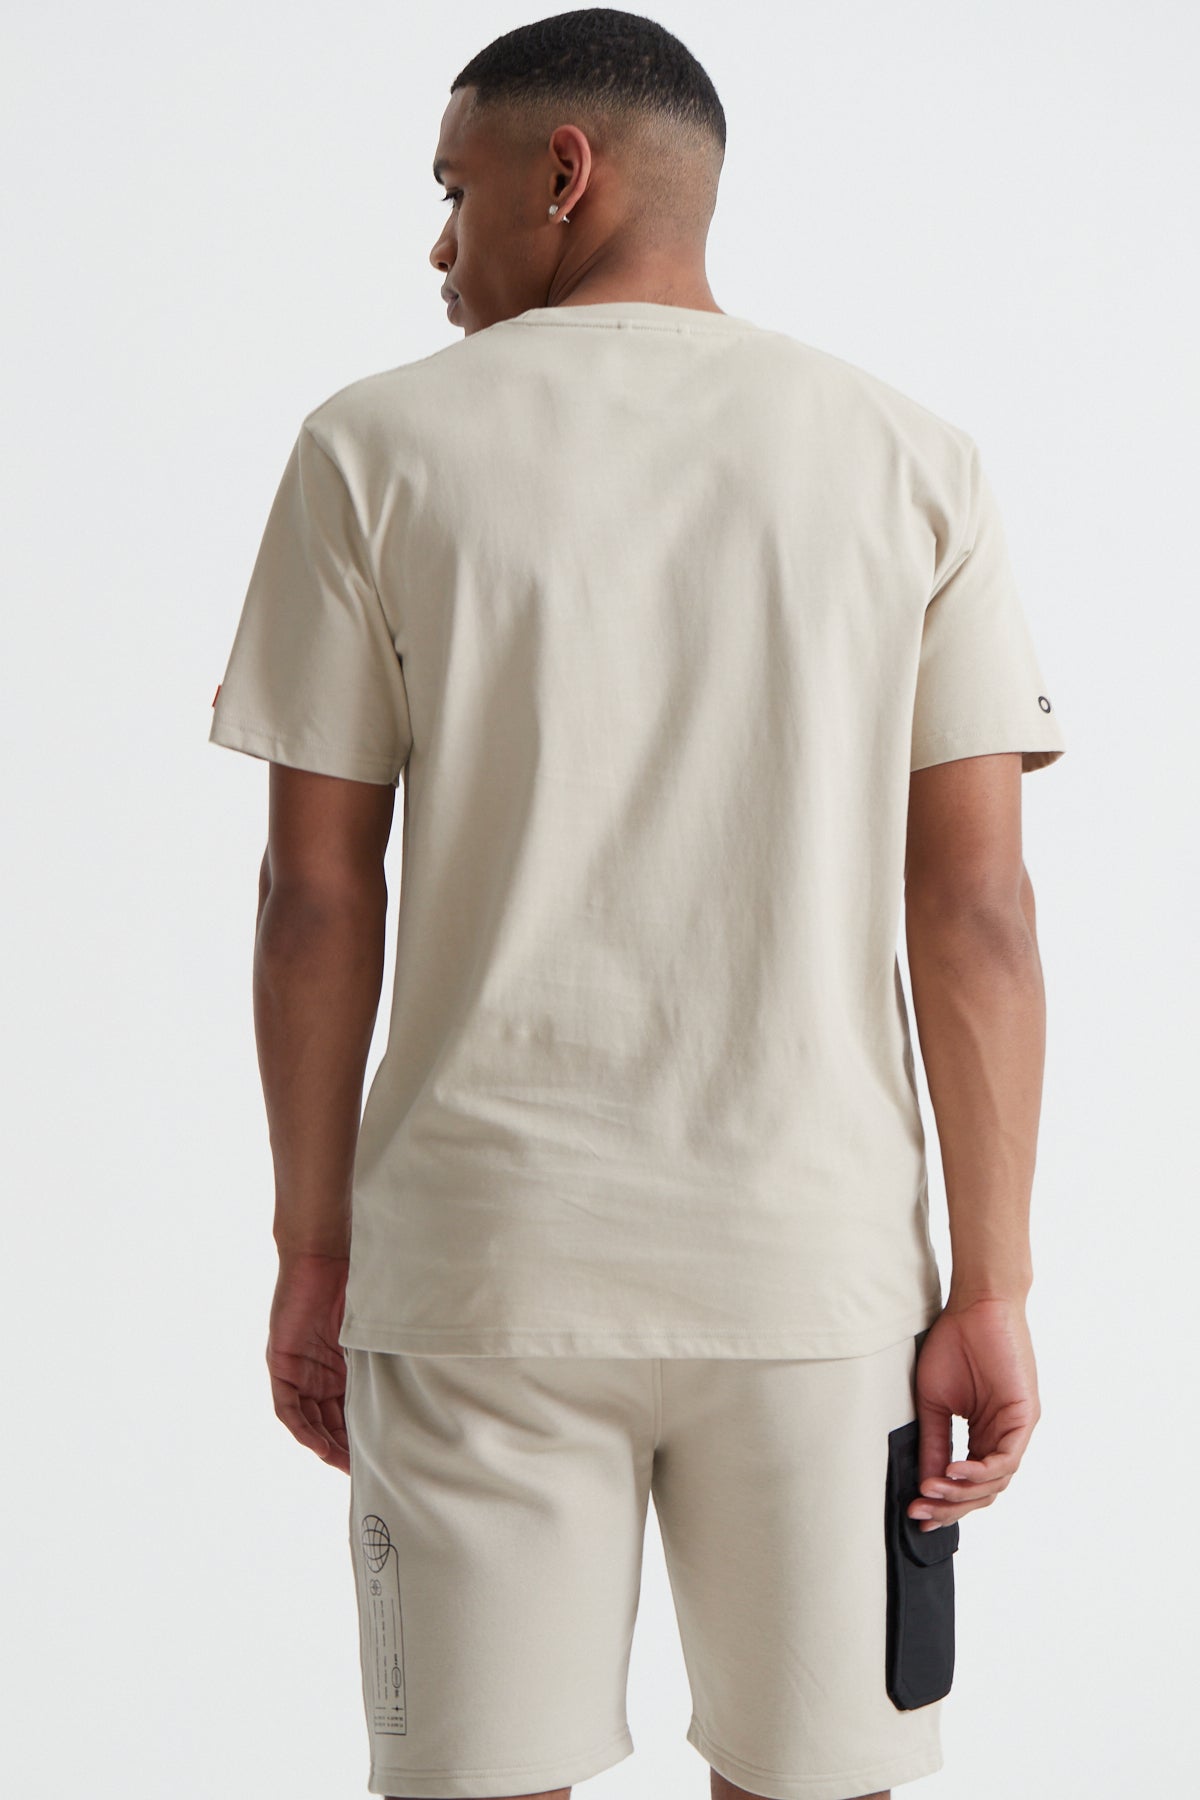 Off The Grid T-shirt - Sand Stone